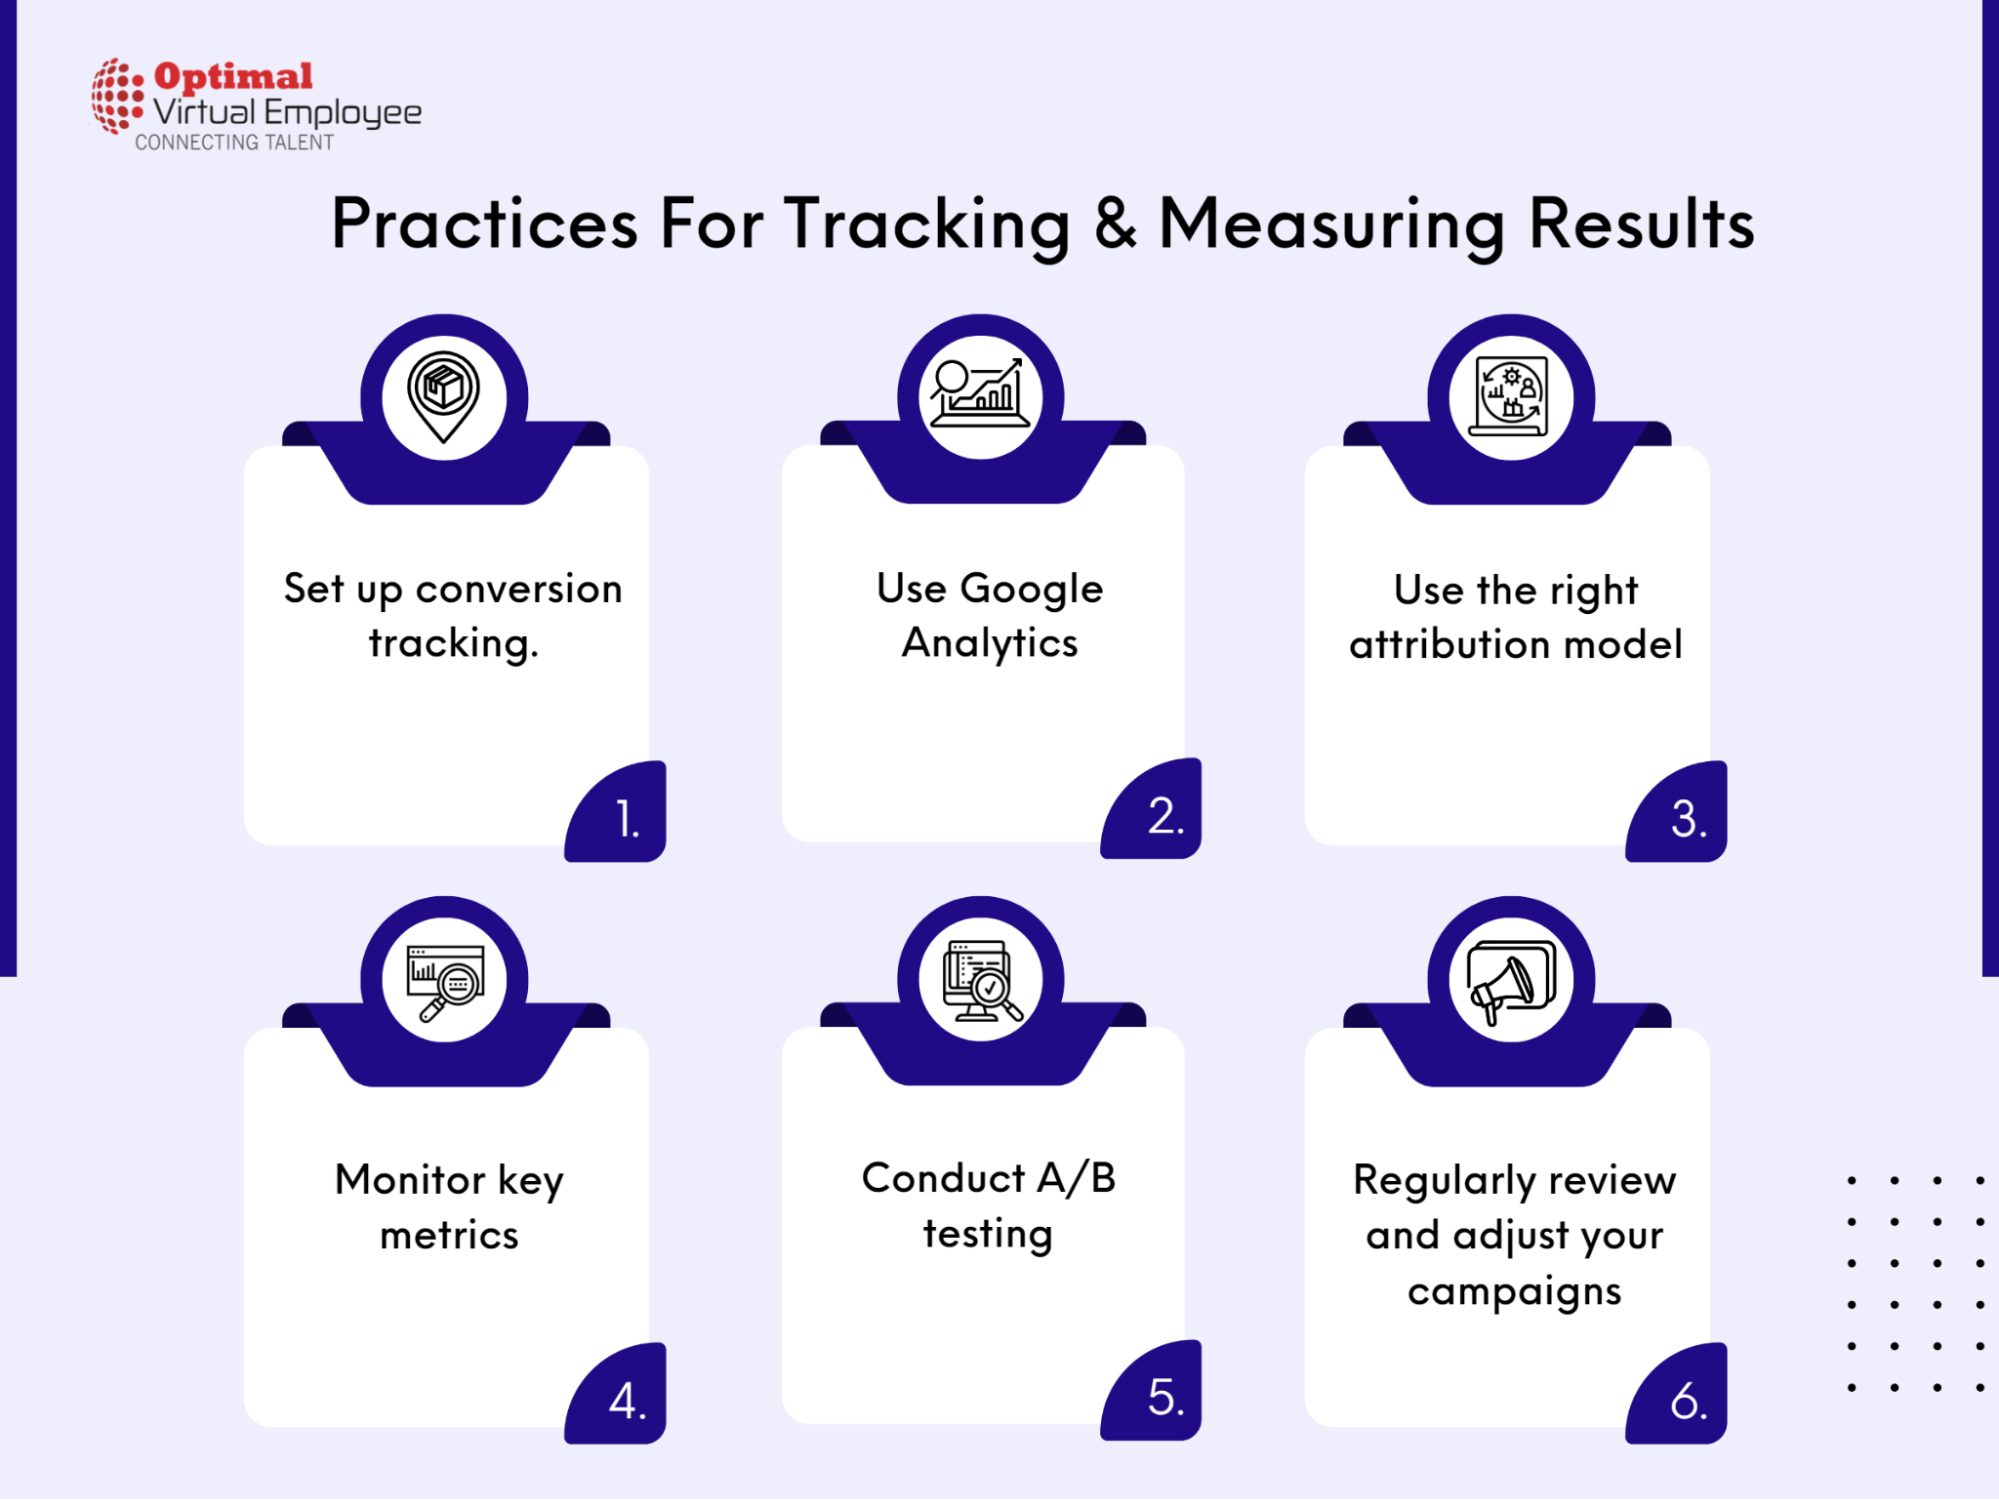 Best Practices For Tracking & Measuring Results